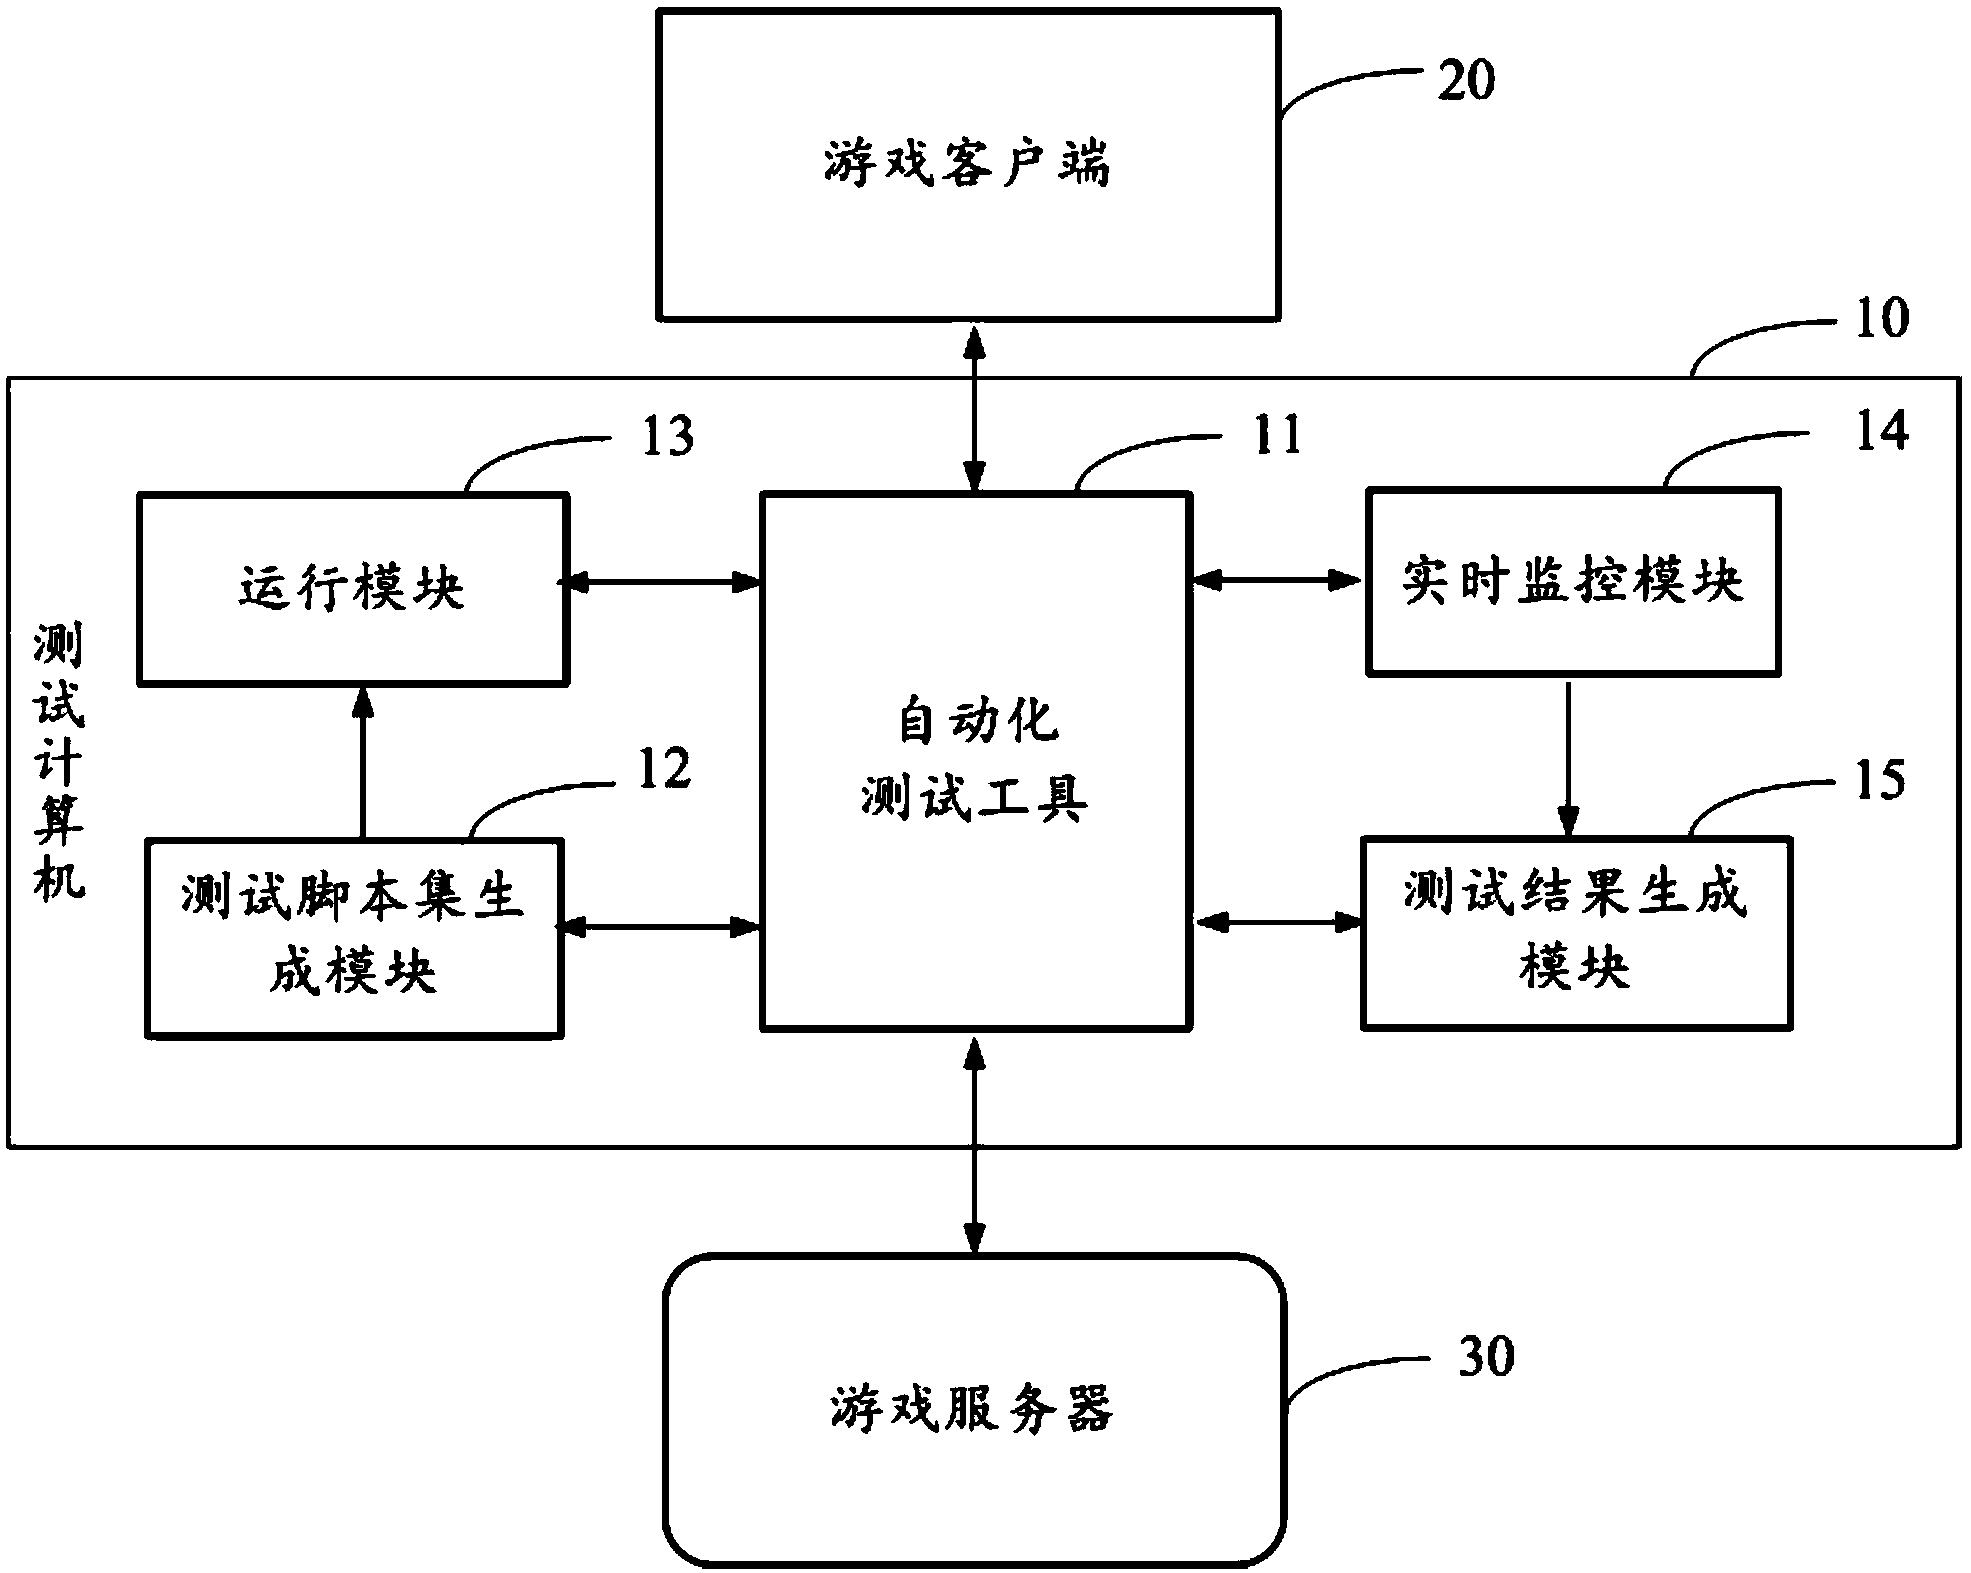 Method and system for testing network game performance